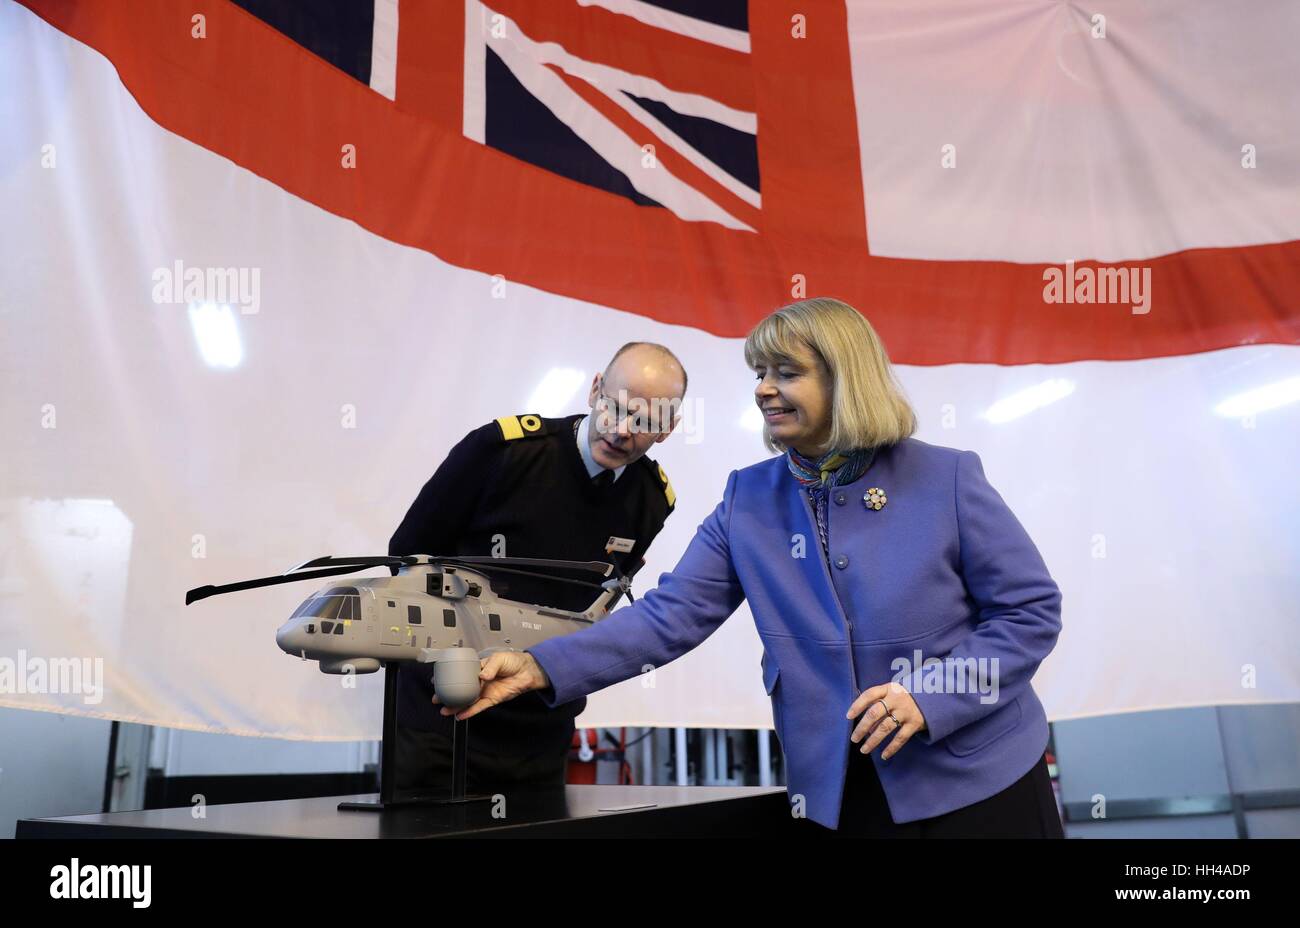 Minister for Defence Procurement Harriett Baldwin (right) and Commodore Steve Allen, Royal Navy, Assistant Chief of Staff Aviation, look at a model of a Merlin helicopter with the CROWSNEST Airborne Early Warning system fitted, on board HMS Dragon - a Type 45 Air Defence Destroyer - at Portsmouth Naval Base, where an announcement for a multi-million pound deal for a new cutting-edge helicopter-borne surveillance system designed to protect Royal Navy ships including the new Queen Elizabeth-class aircraft carriers was made. Stock Photo